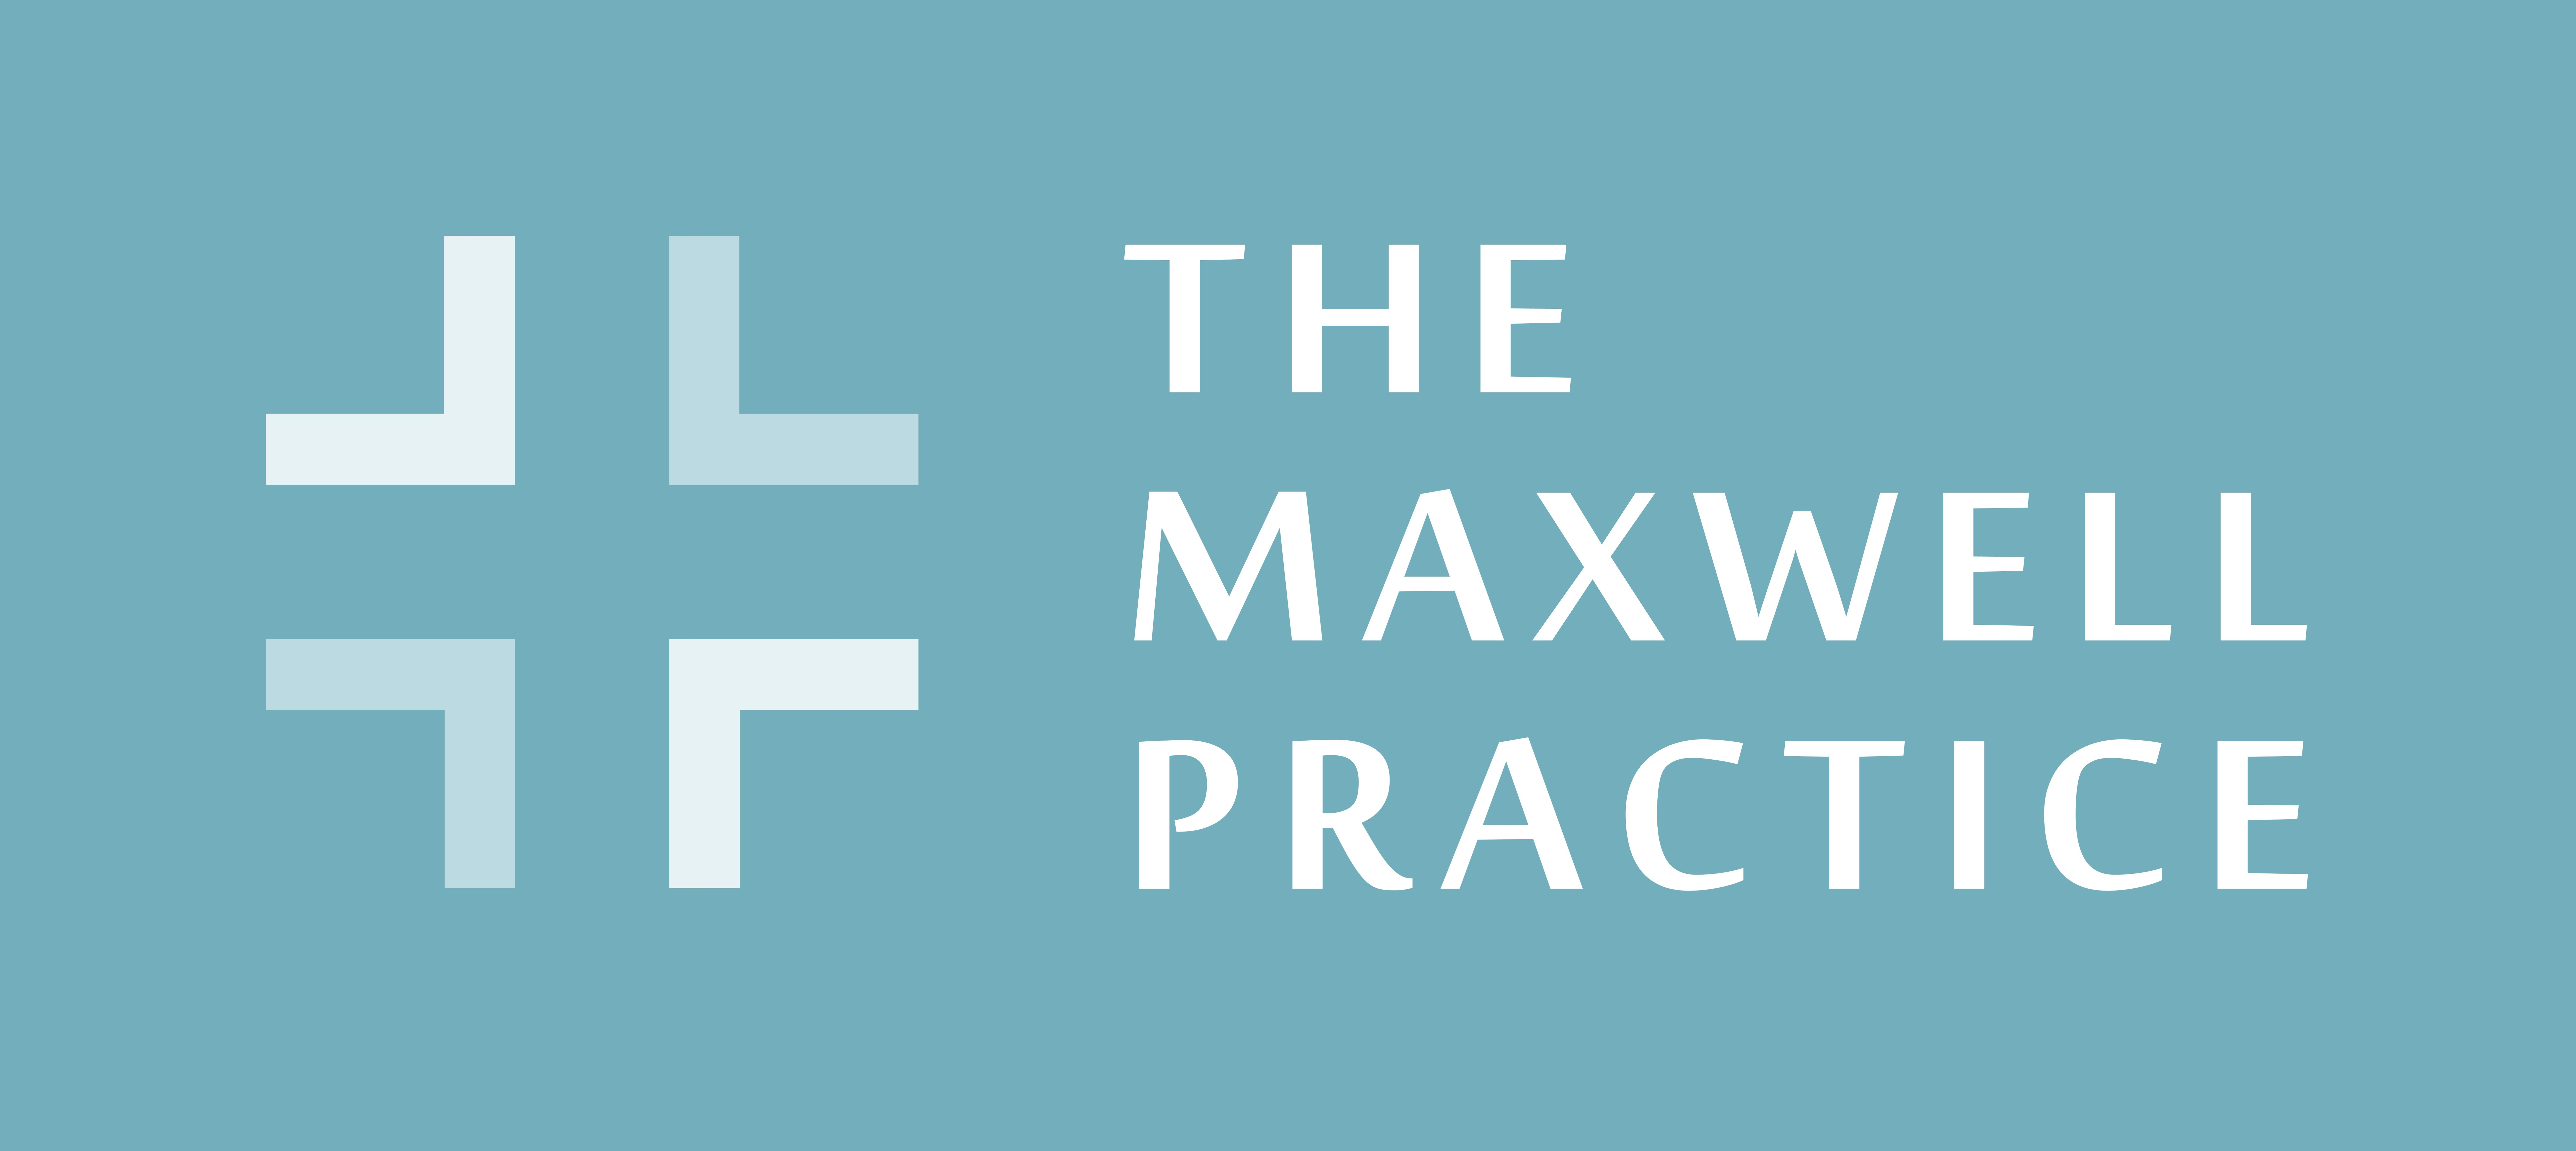 The maxwell practice logo image